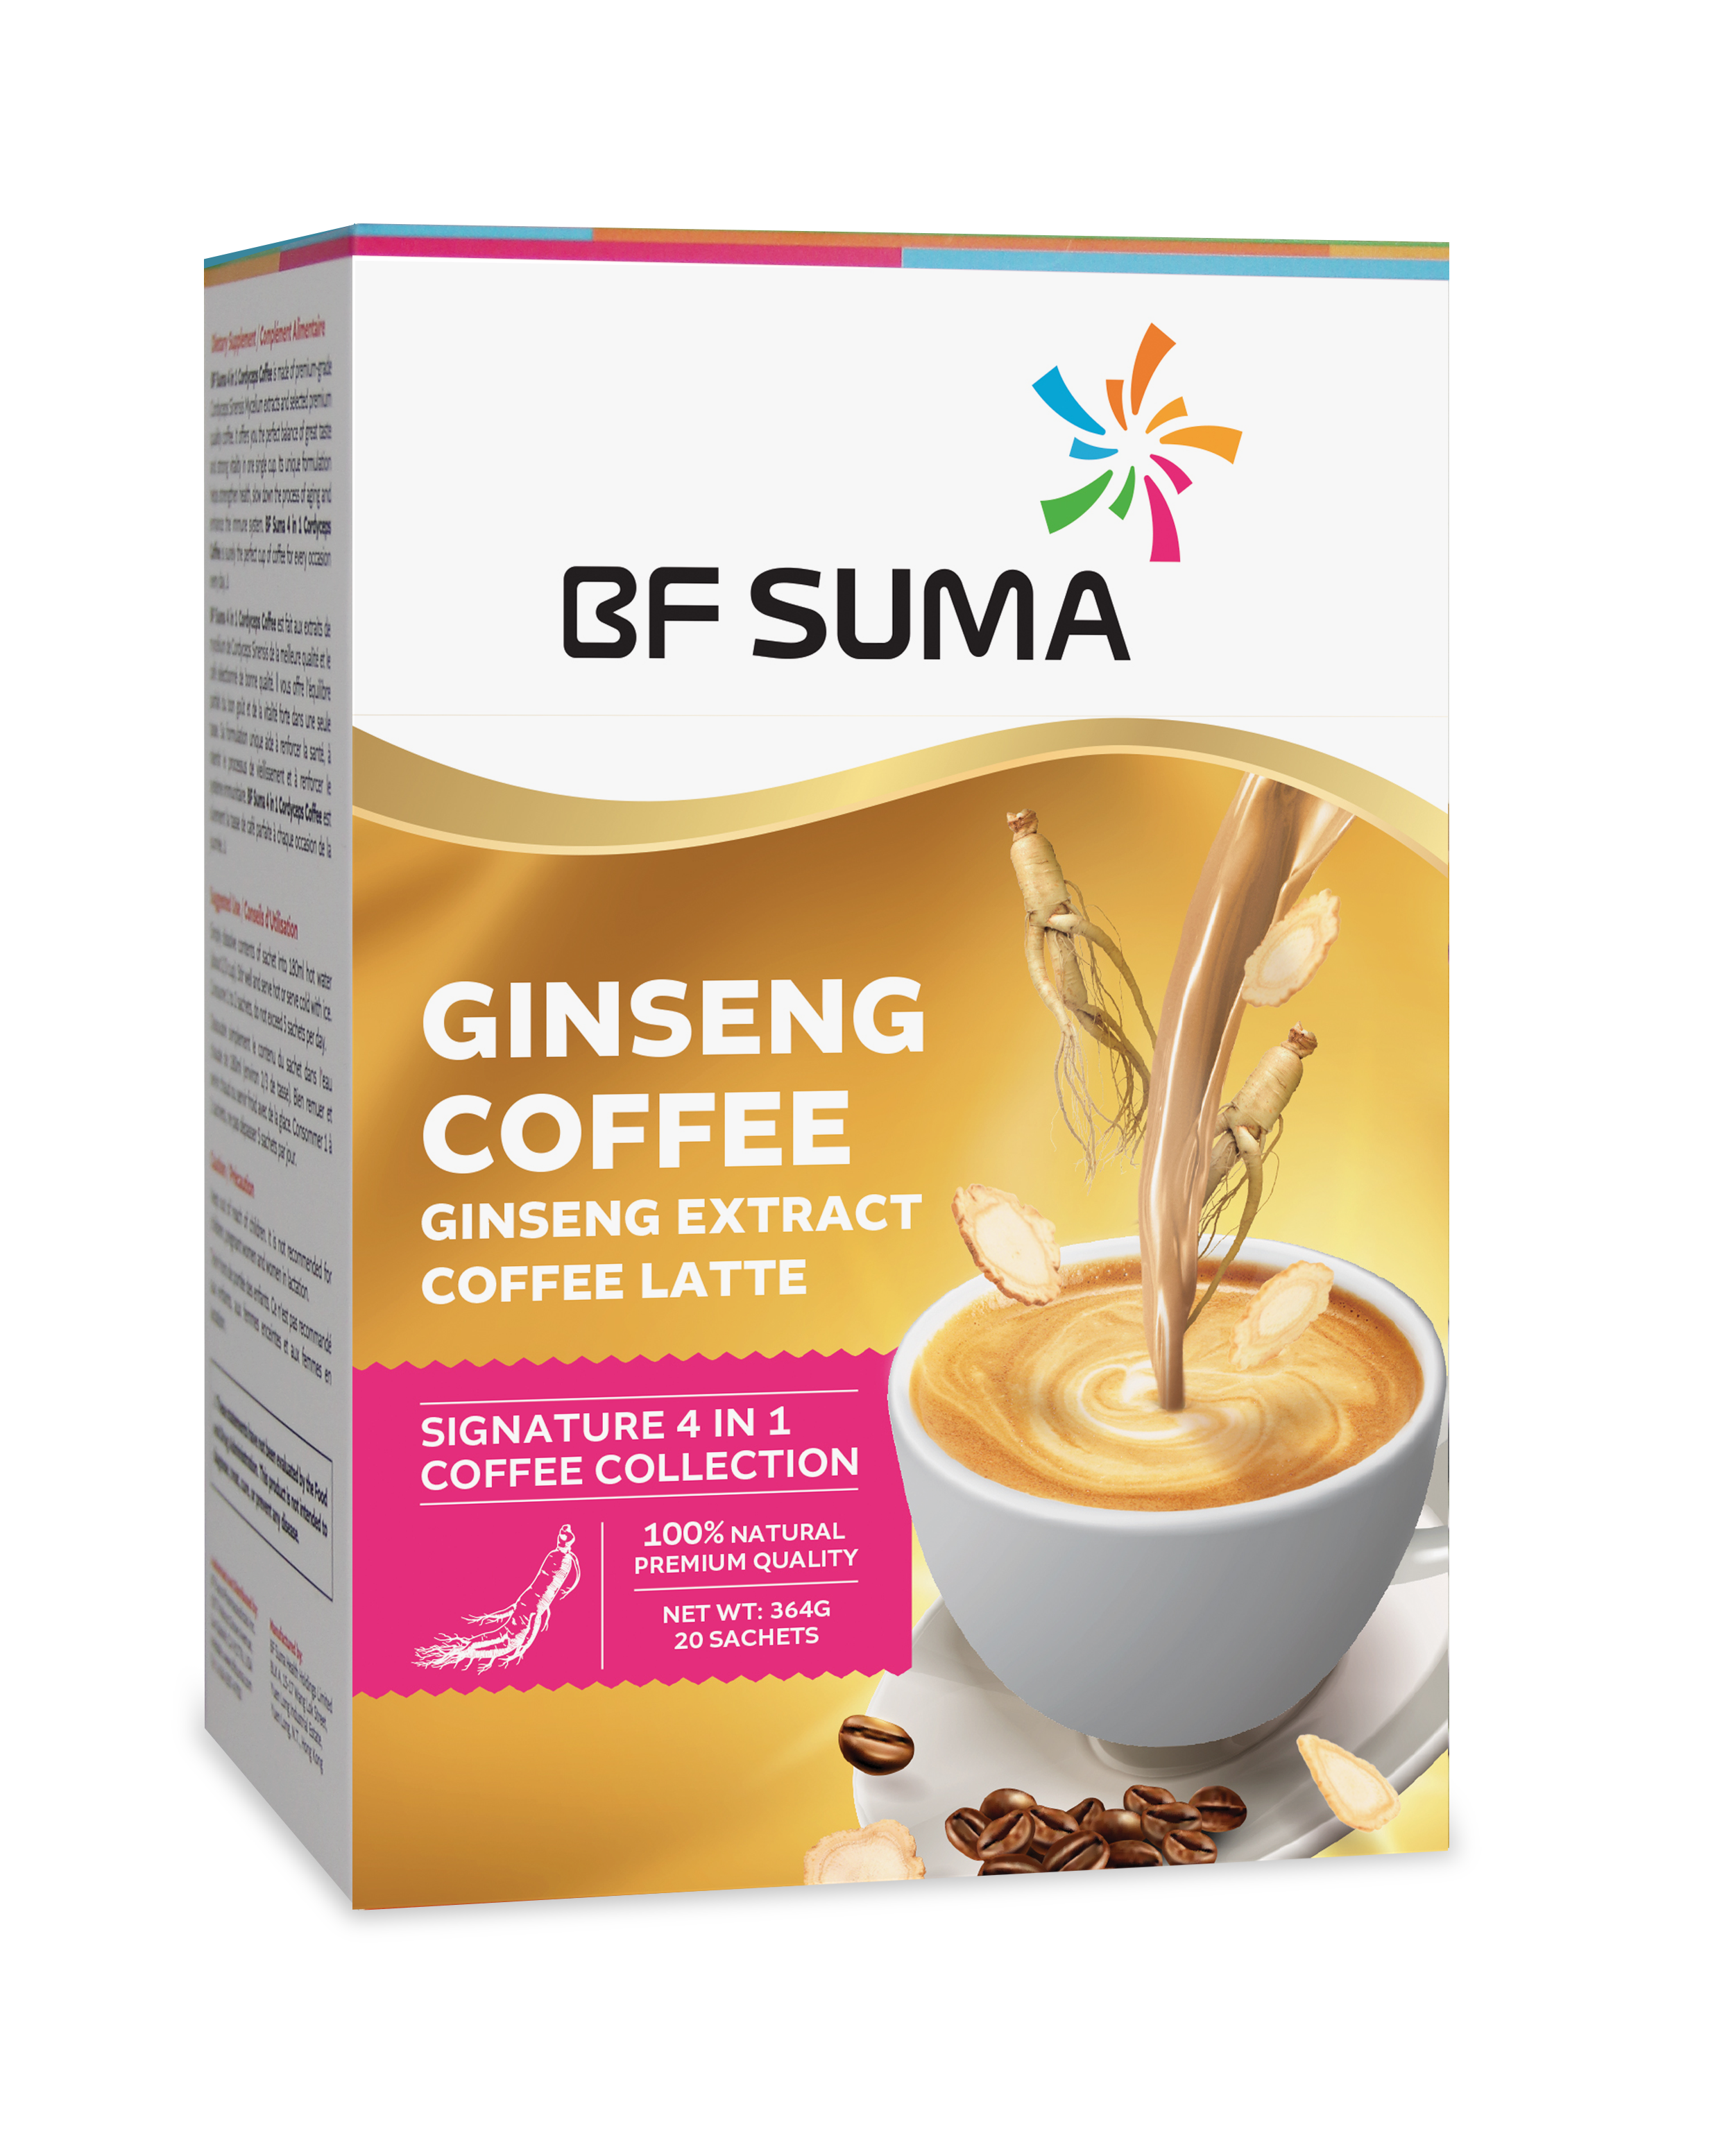 4 in 1 Ginseng Coffee 四合一人蔘咖啡